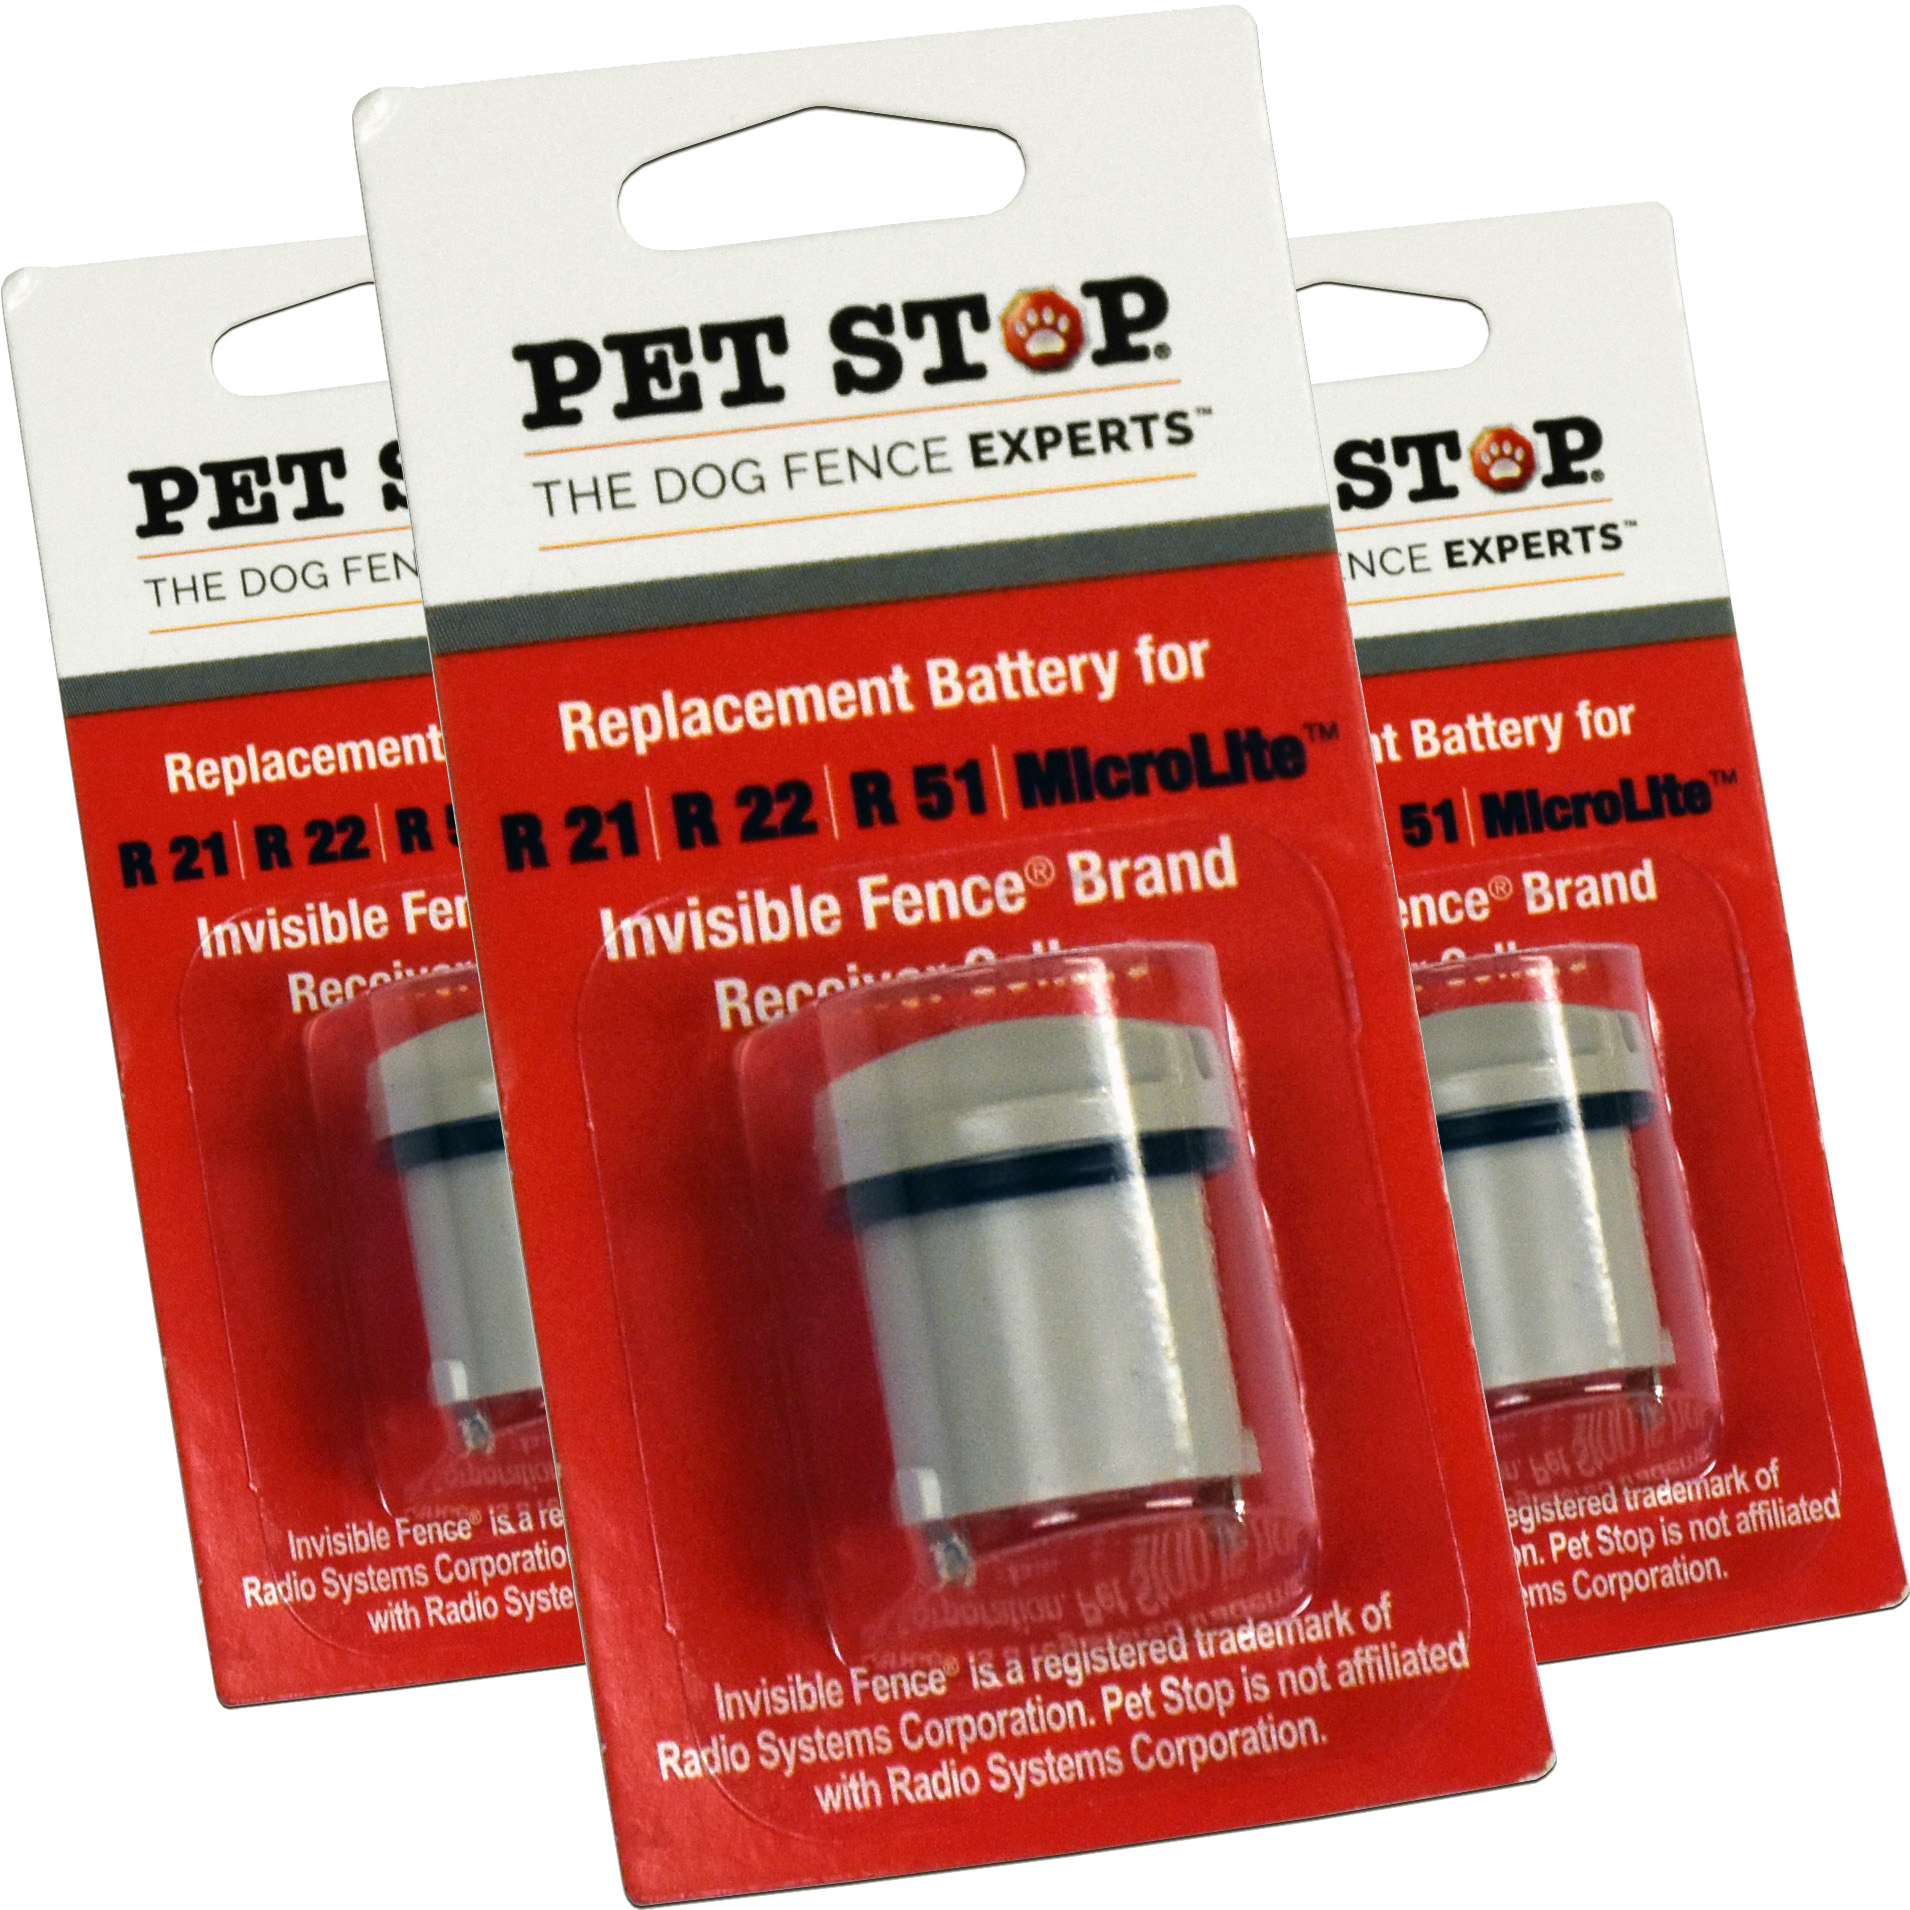 https://www.safepetfencing.com/wp-content/uploads/2016/05/Battery-PS-IFCO-3Pack.jpg